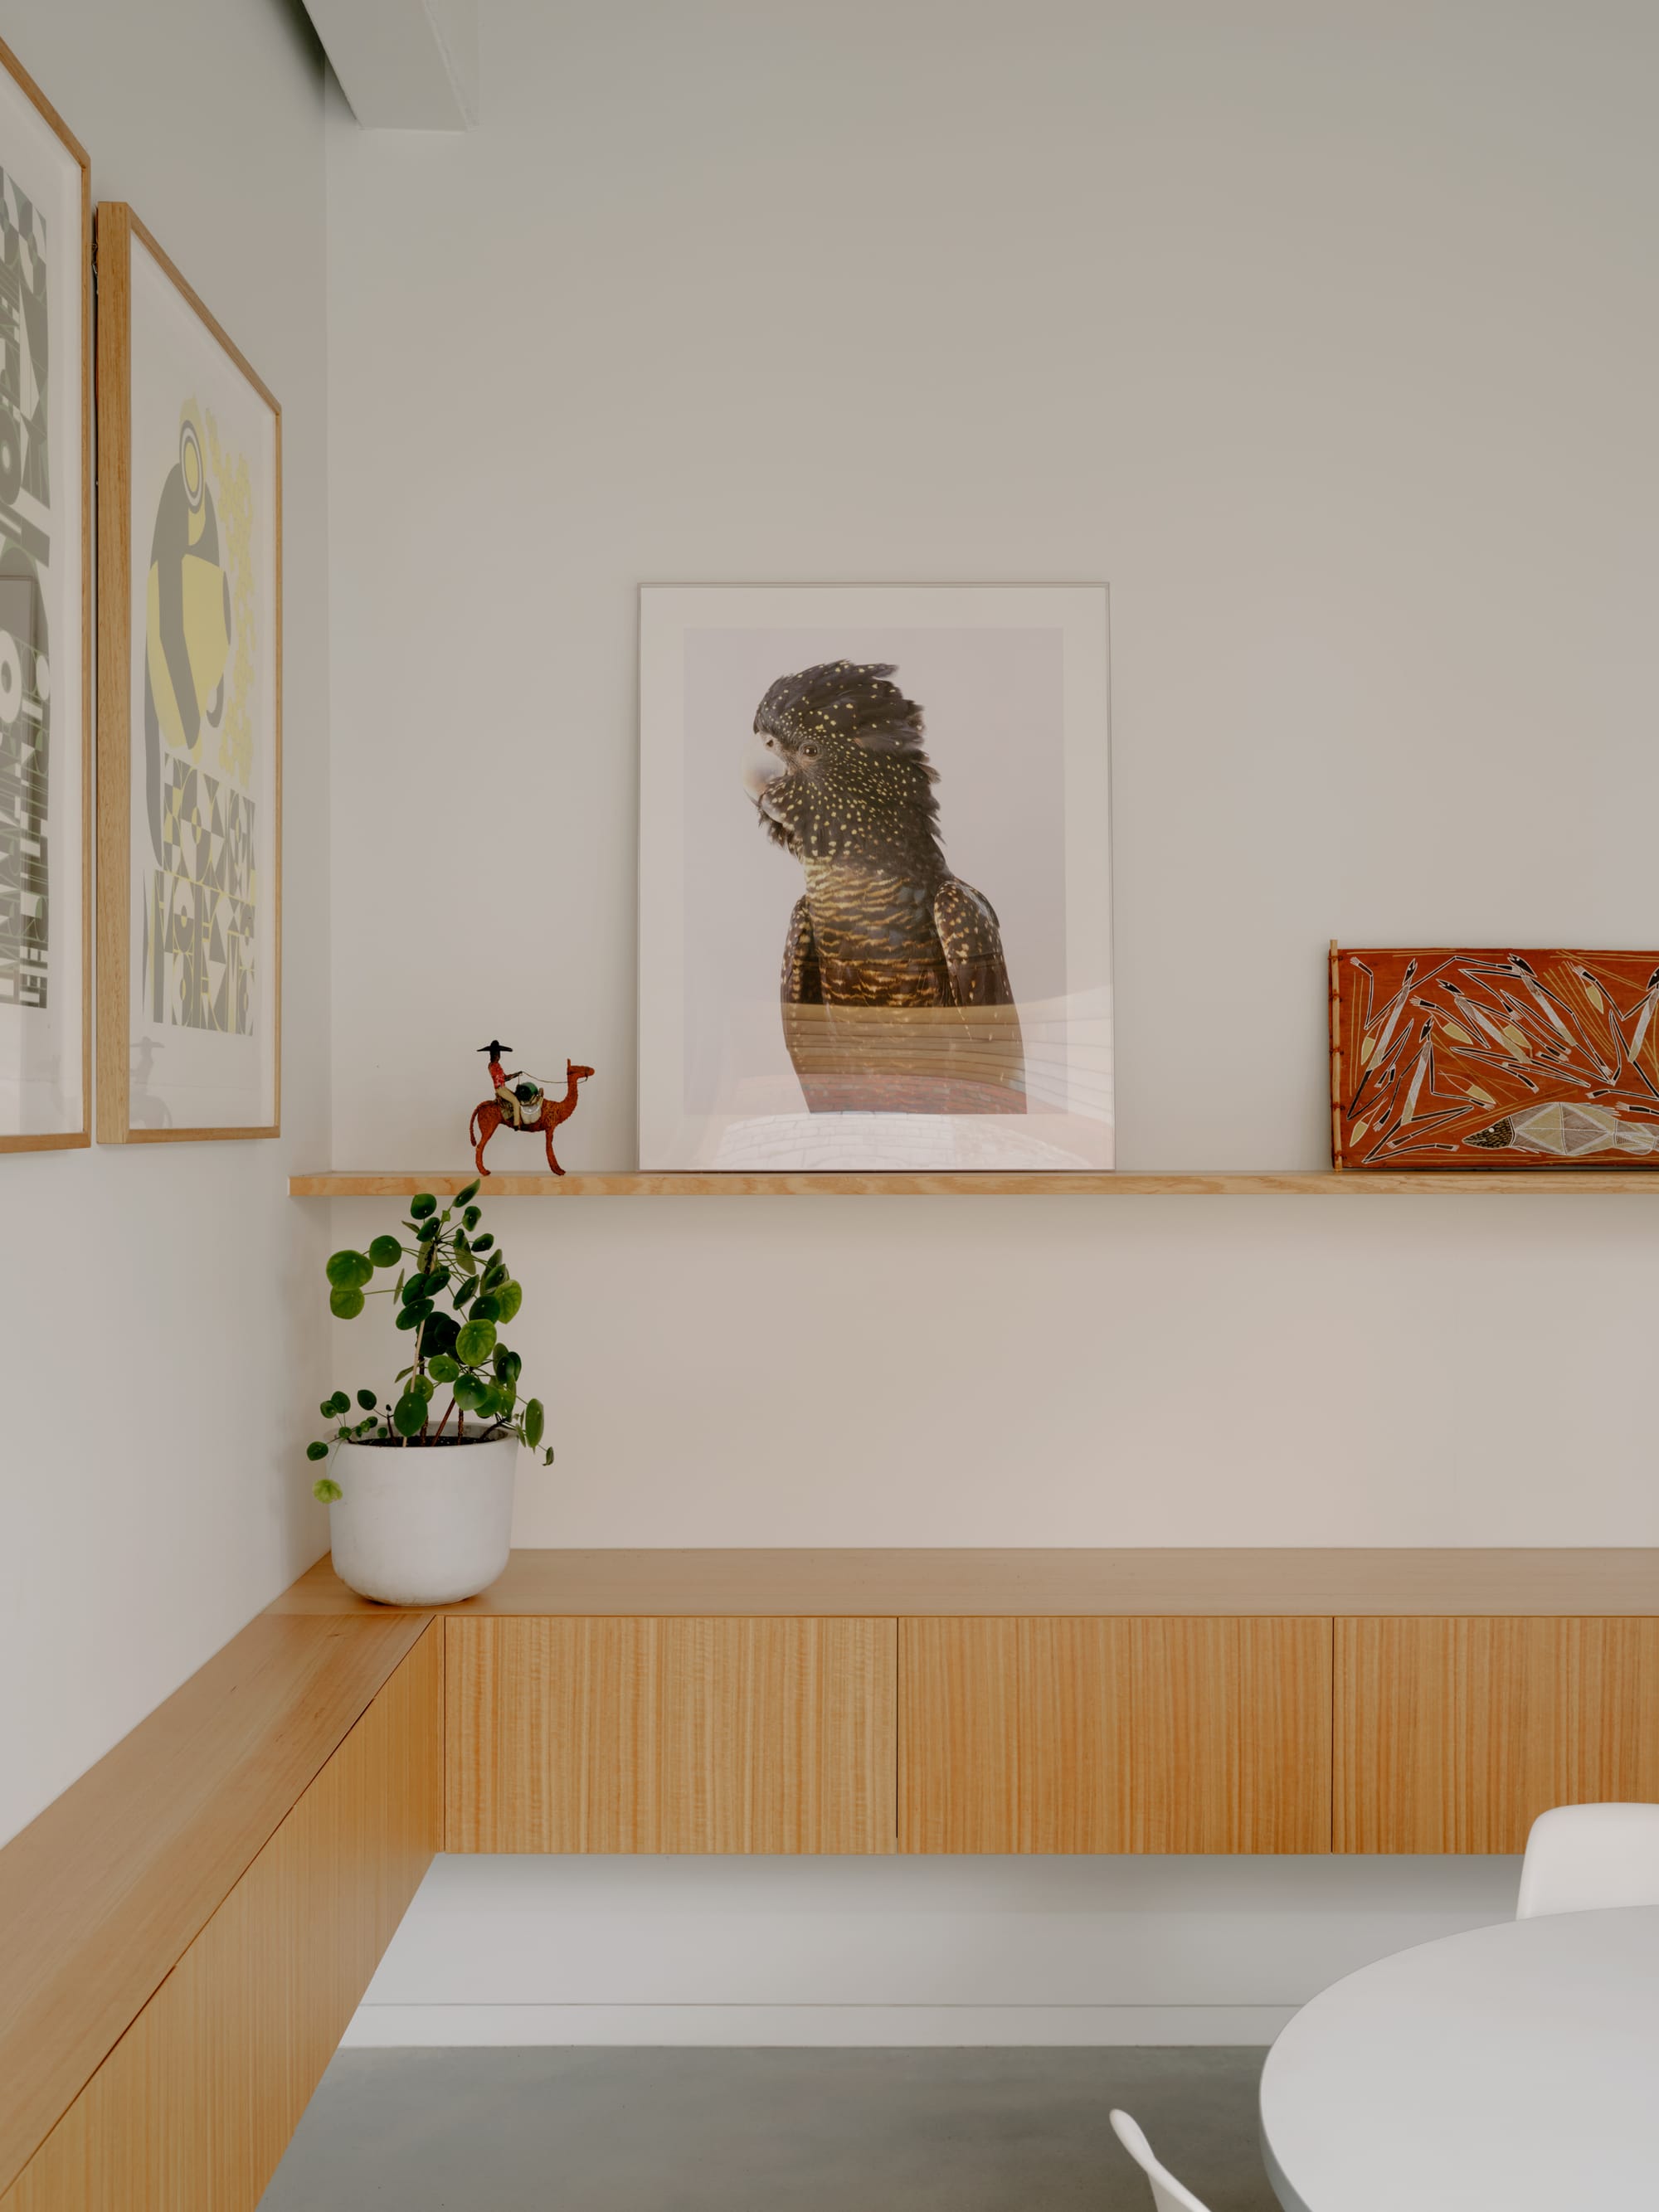 Corymbia by Karen Abernethy Architects. Photography by Tom Ross. Timber joinery wrapping around corner of two walls. Timber picture shelves display several eclectic images. White walls and white table and chairs visible in bottom right corner,